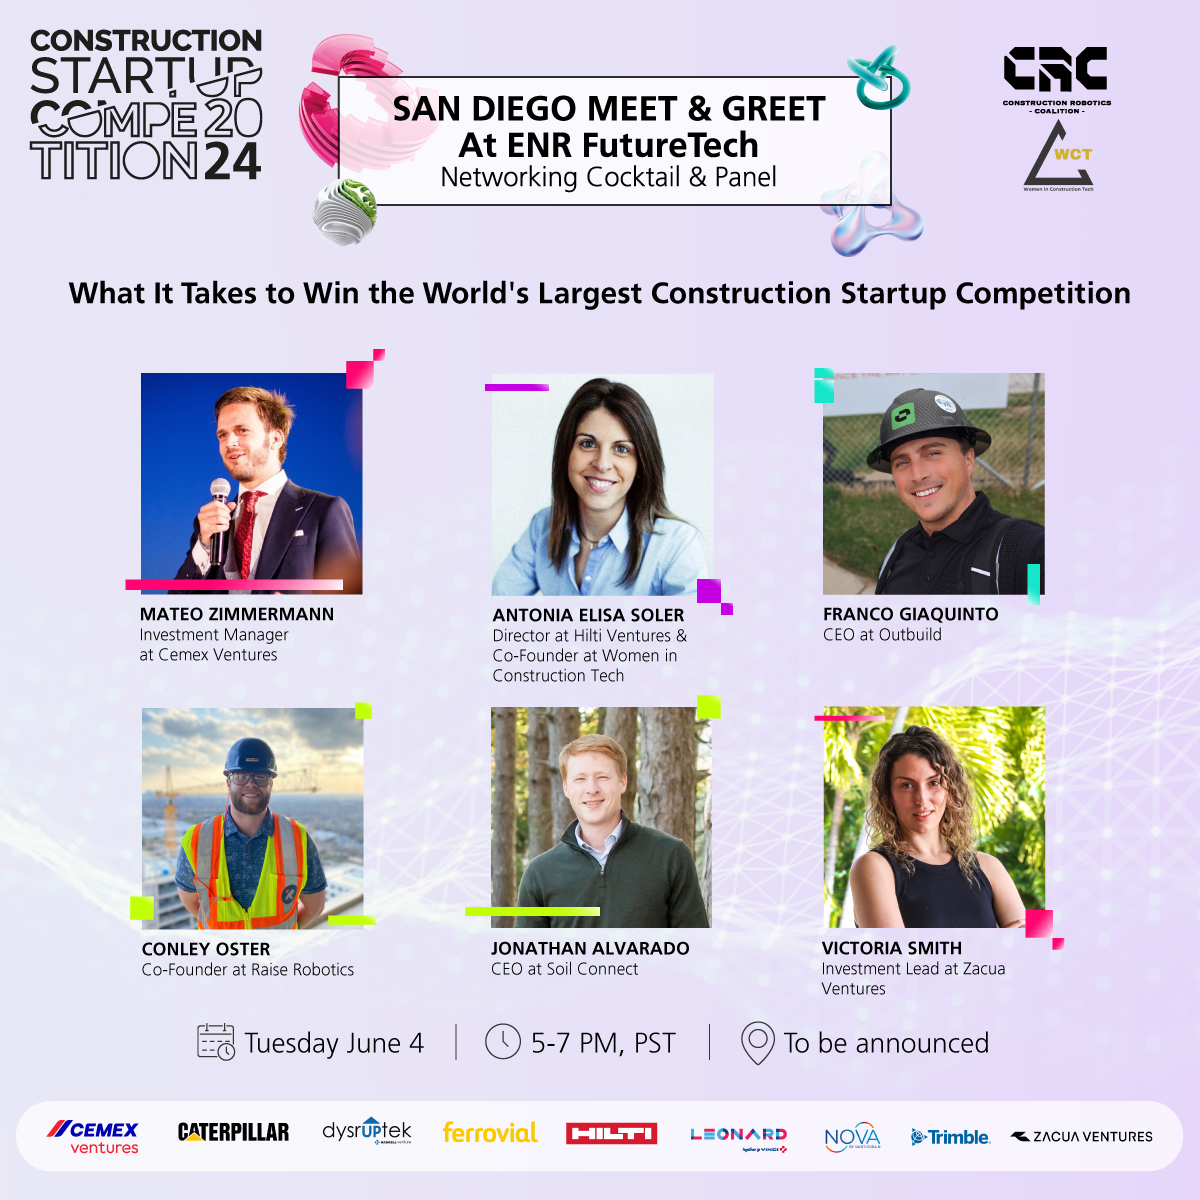 📢 Calling all Contech & Cleantech startups in San Diego, CA on June 4 -#ConstructionStartupCompetition2024, in participation w/ Women in Construction Tech & Construction Robotics Coalition, is hosting a networking cocktail and panel during @ENR_FutureTech.

RSVP here: